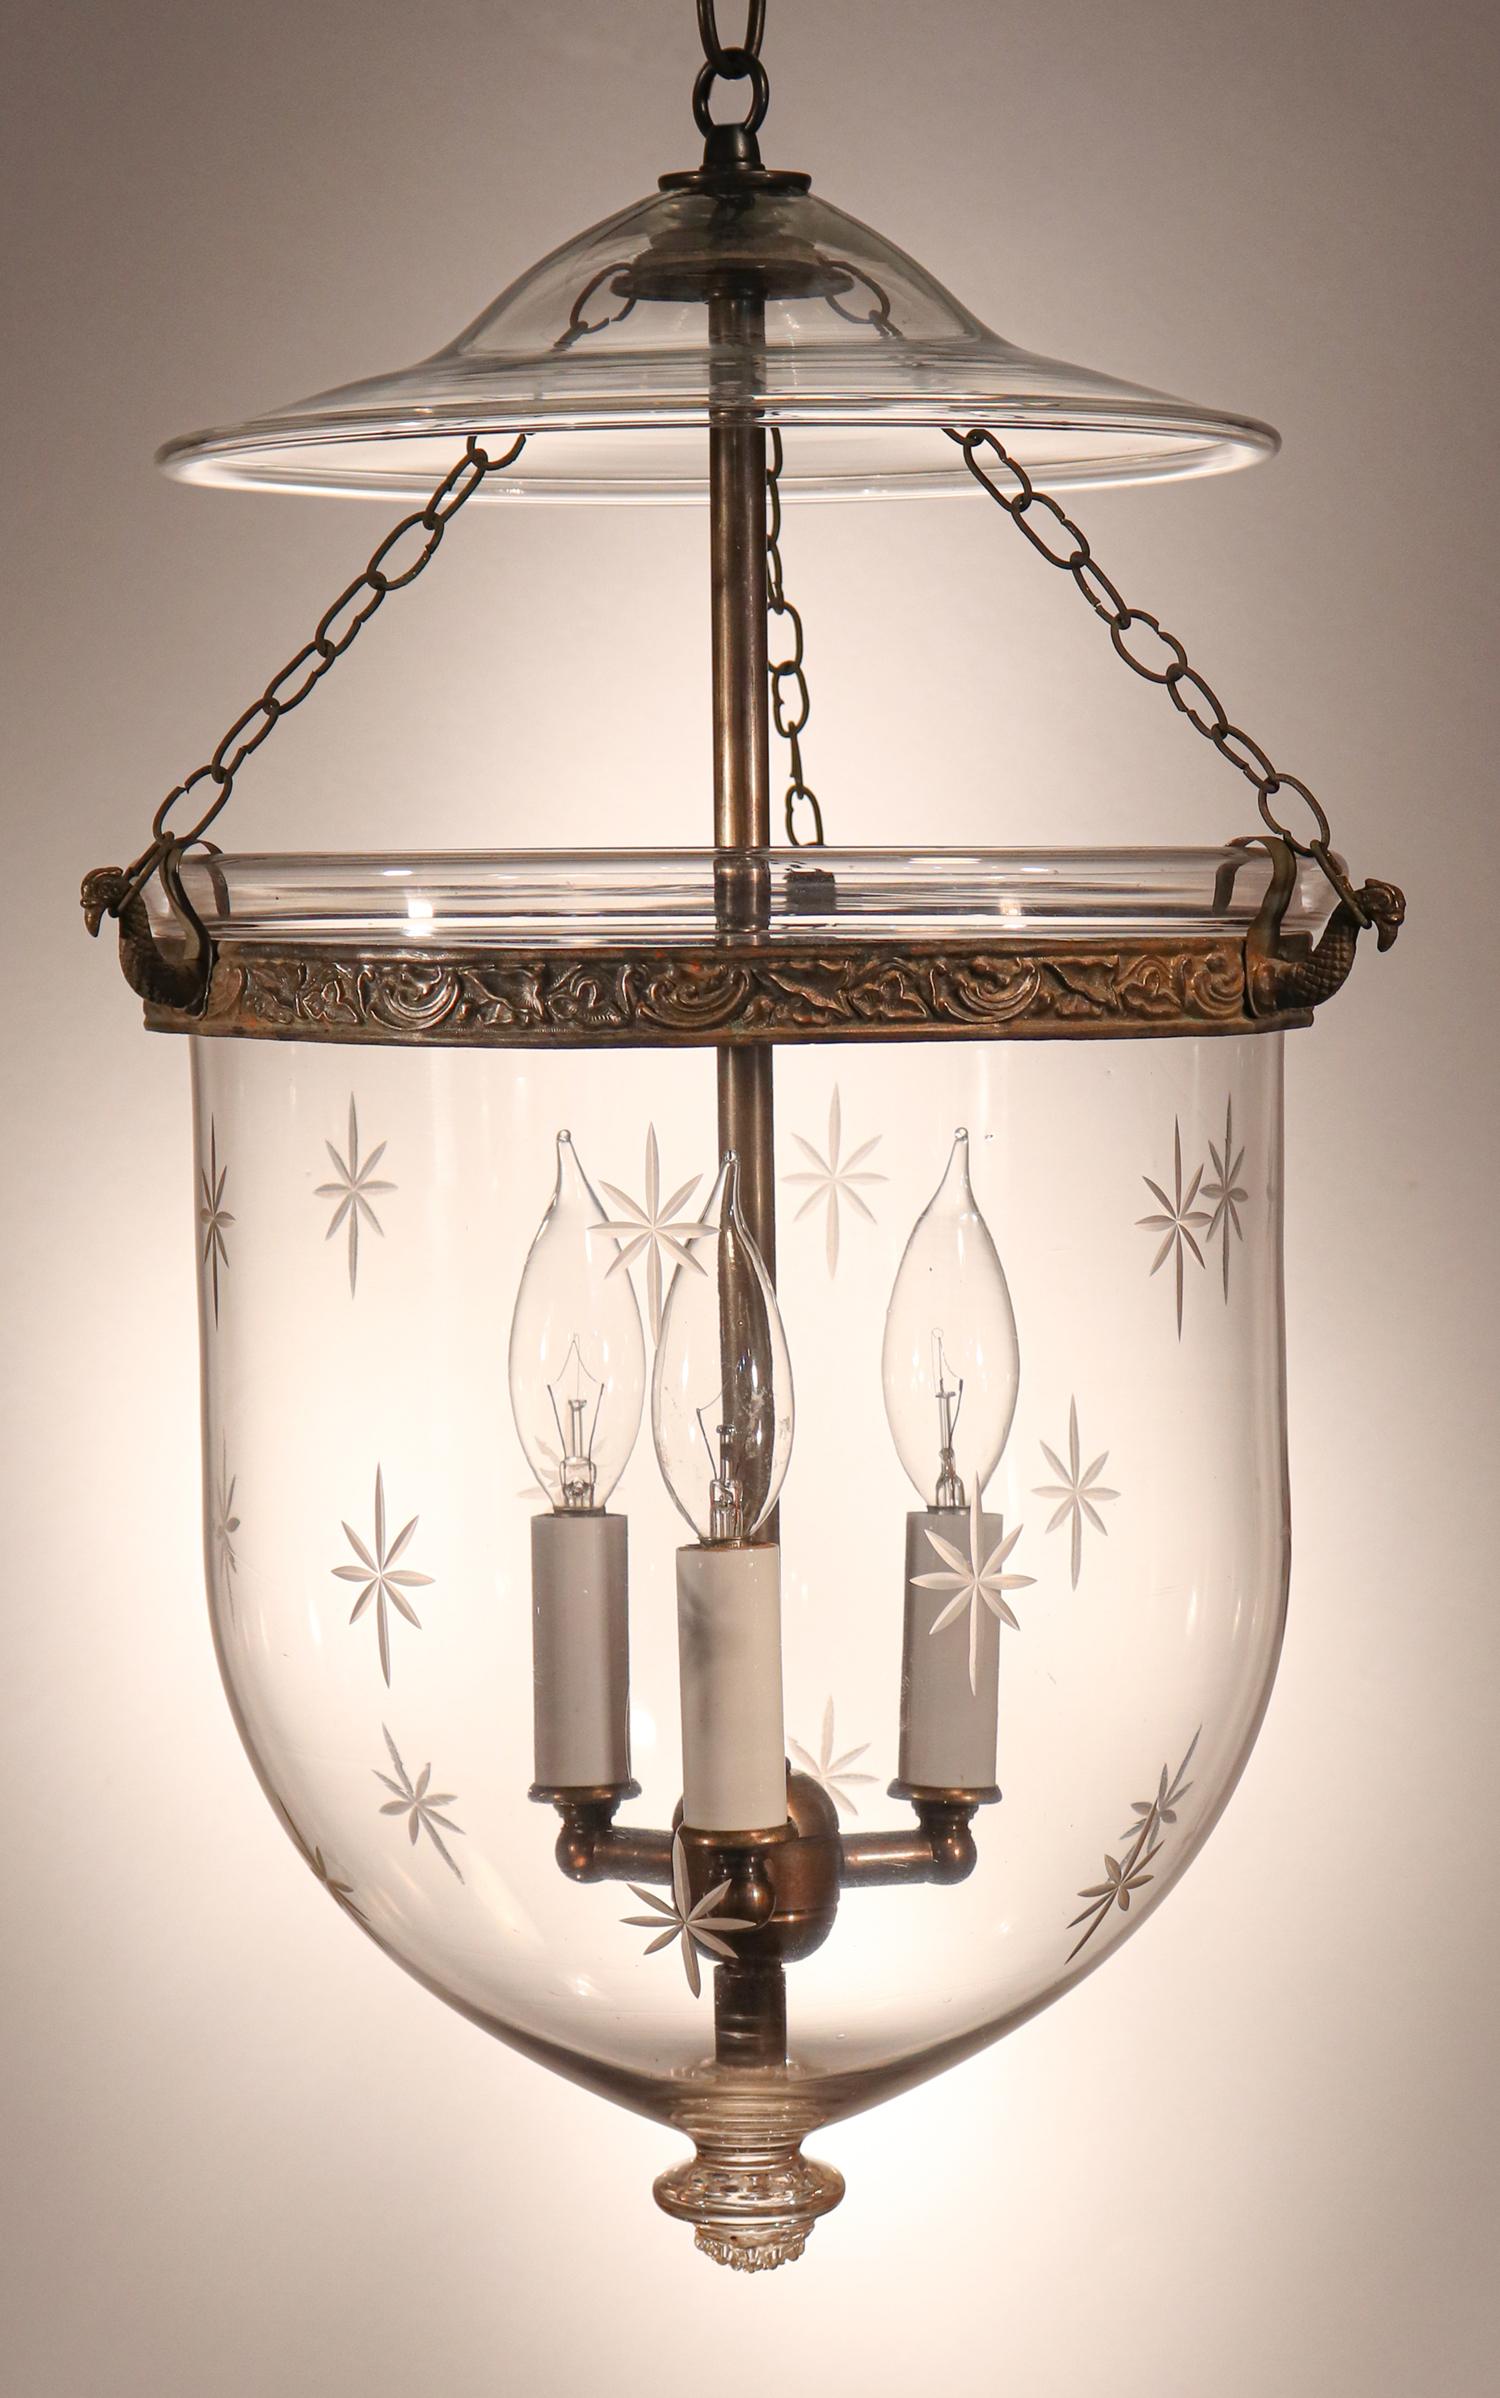 An antique English bell jar lantern with distinctive form and a cut-glass star motif. This circa 1870 lantern features excellent quality hand blown glass with desirable air bubbles in the bell jar. The embossed brass band, which has a leaf design,